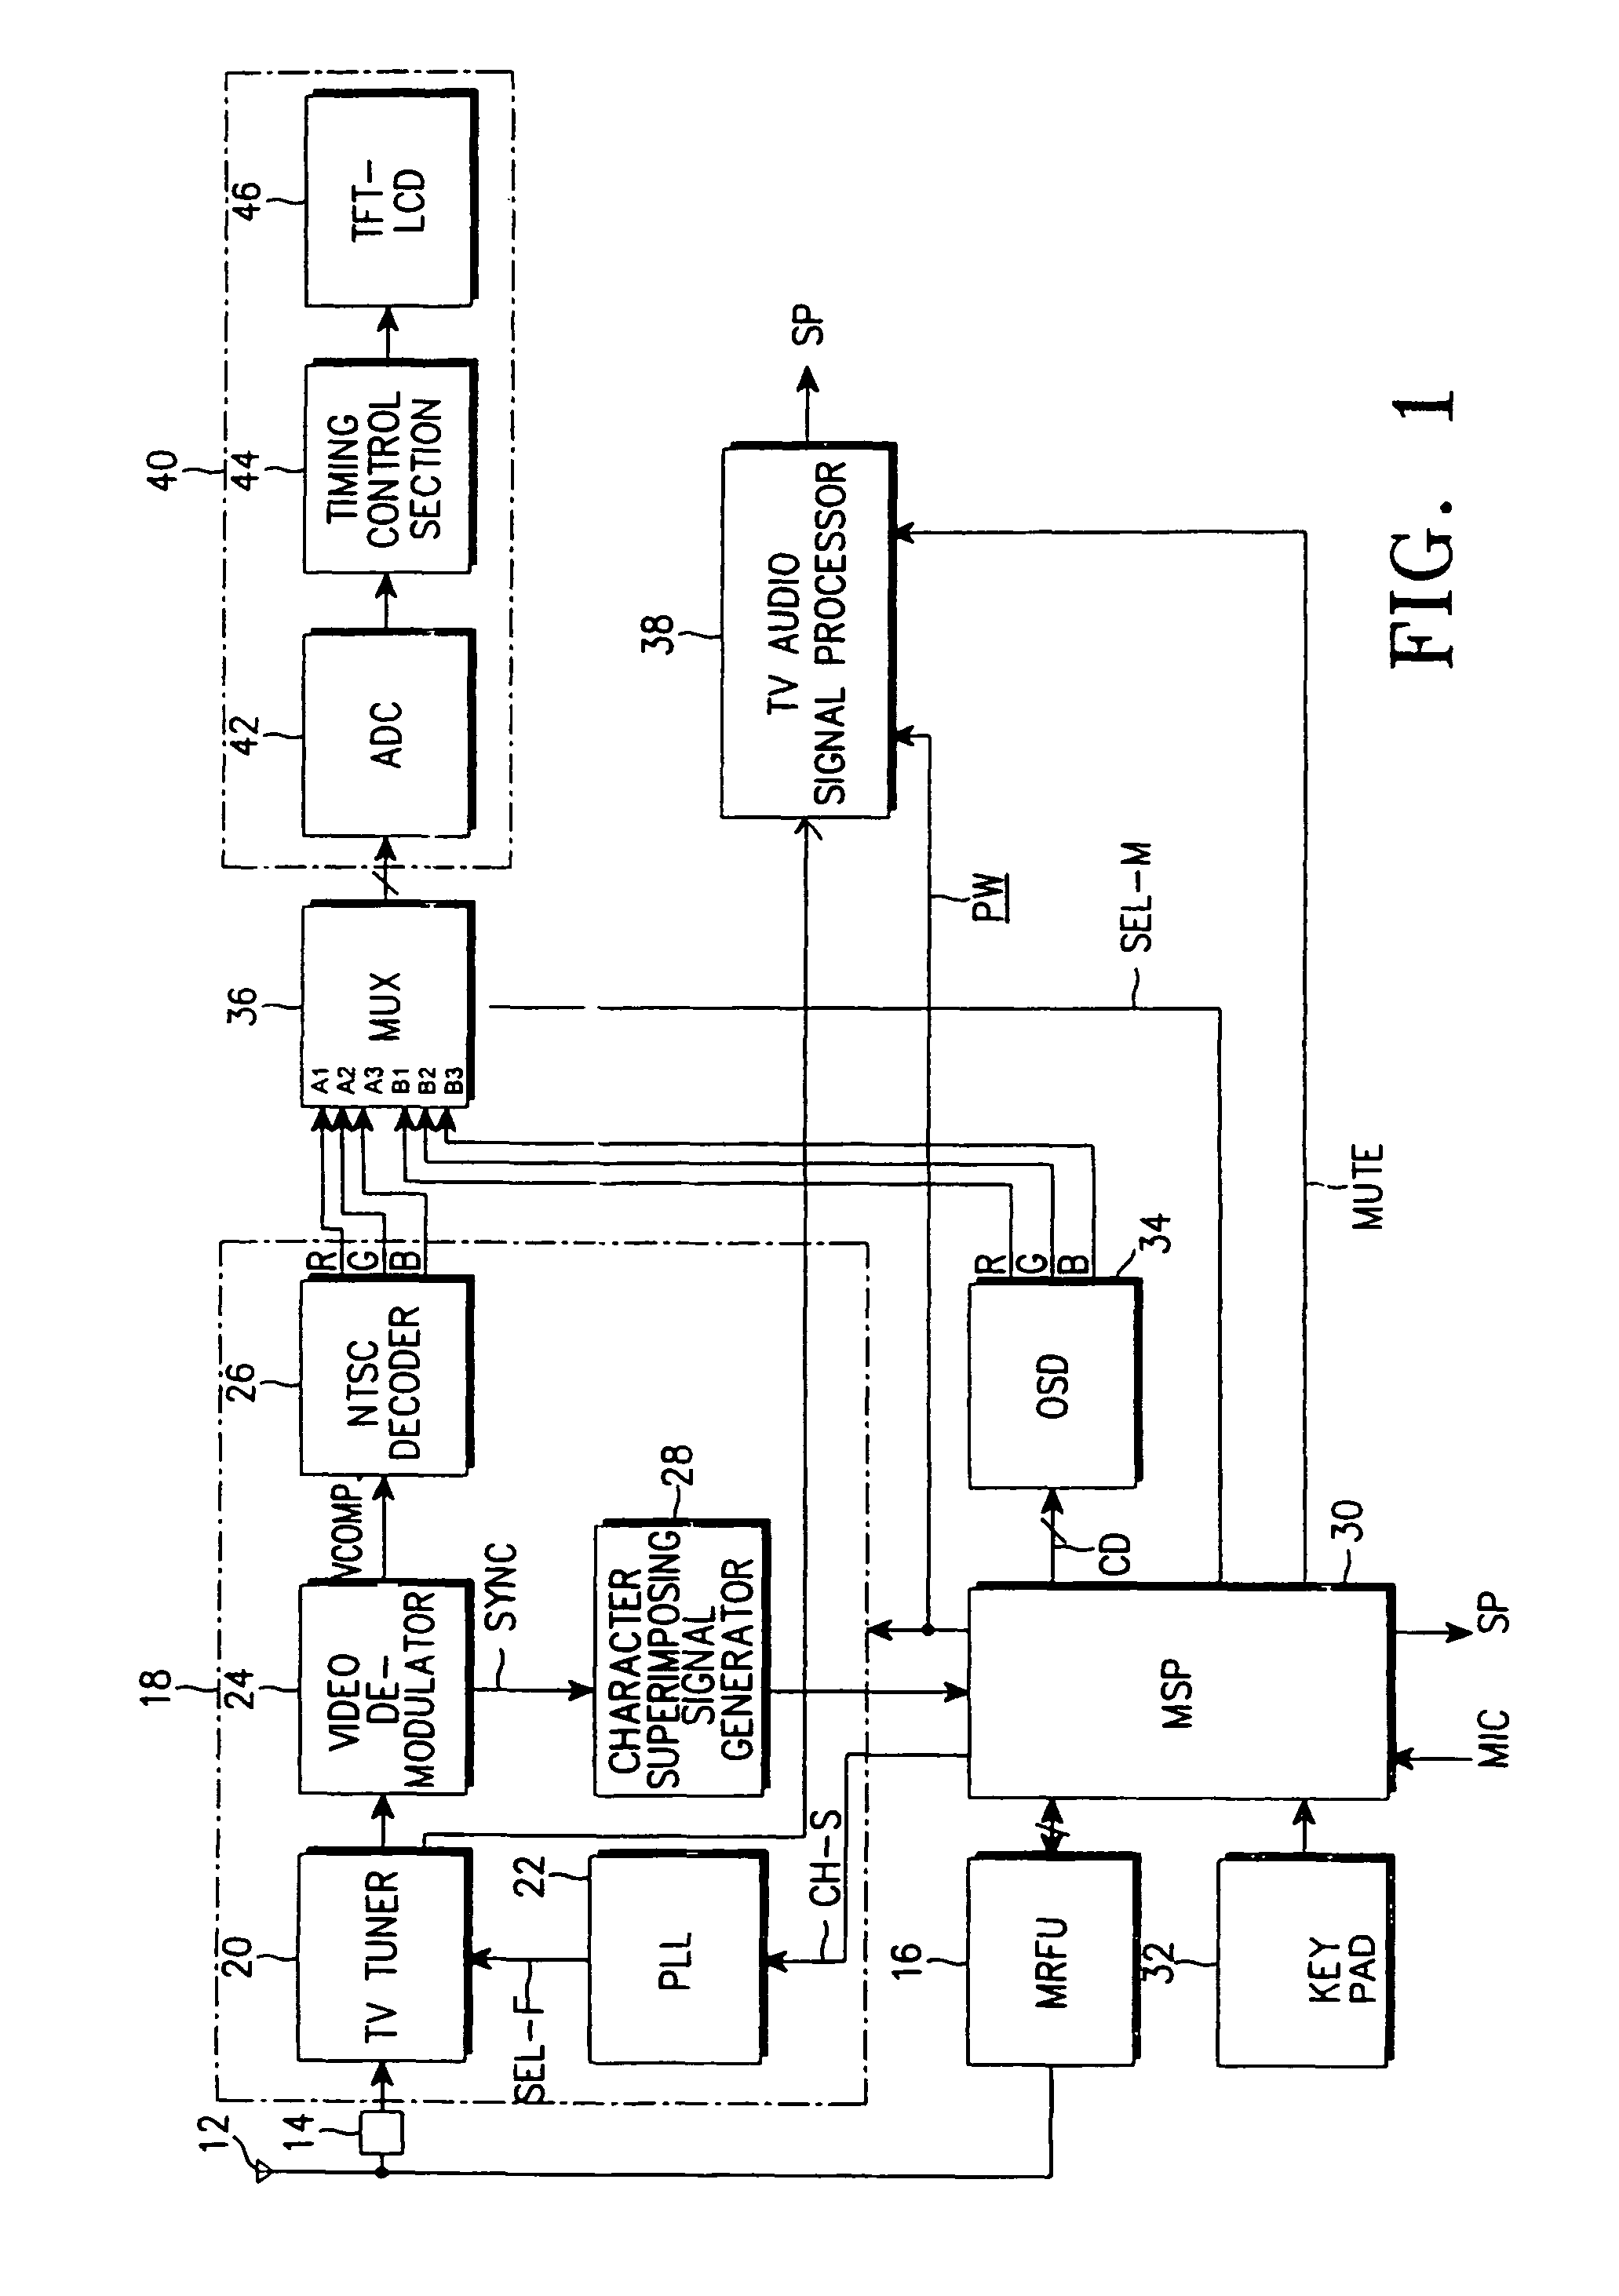 Method and system for controlling operation mode switching of portable television (TV) phone